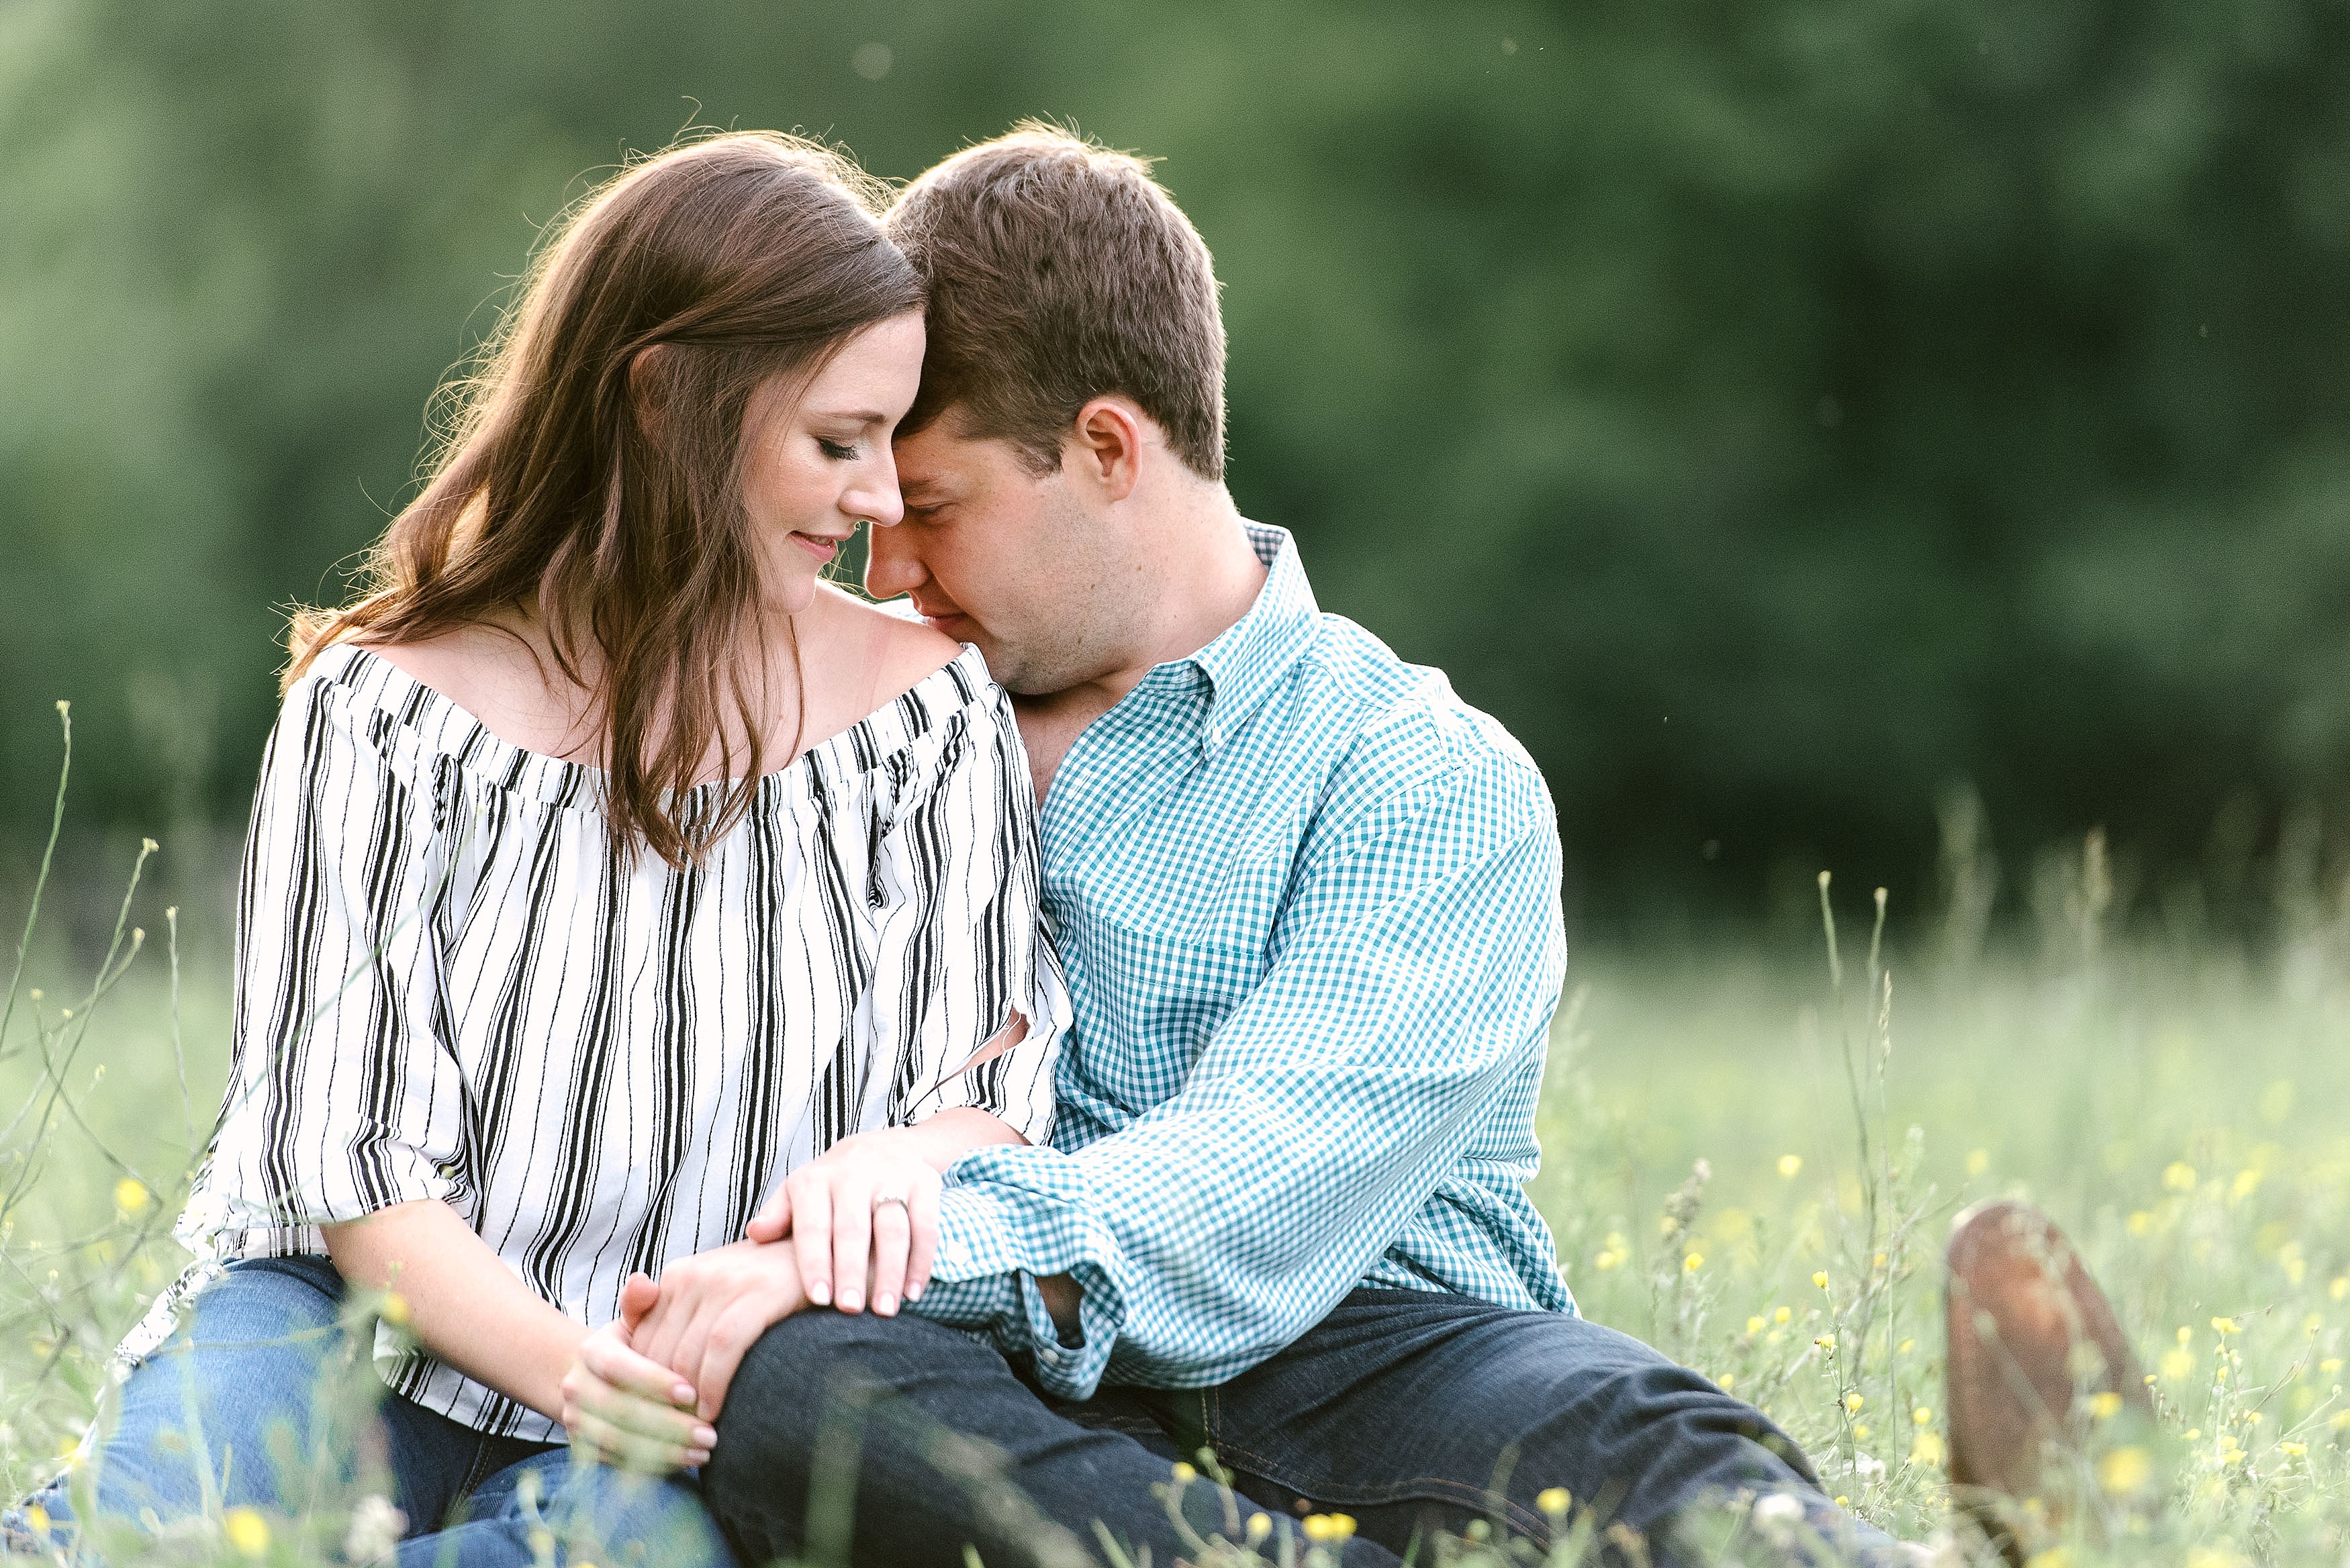 Engagement Session Nashville Outdoors in Field